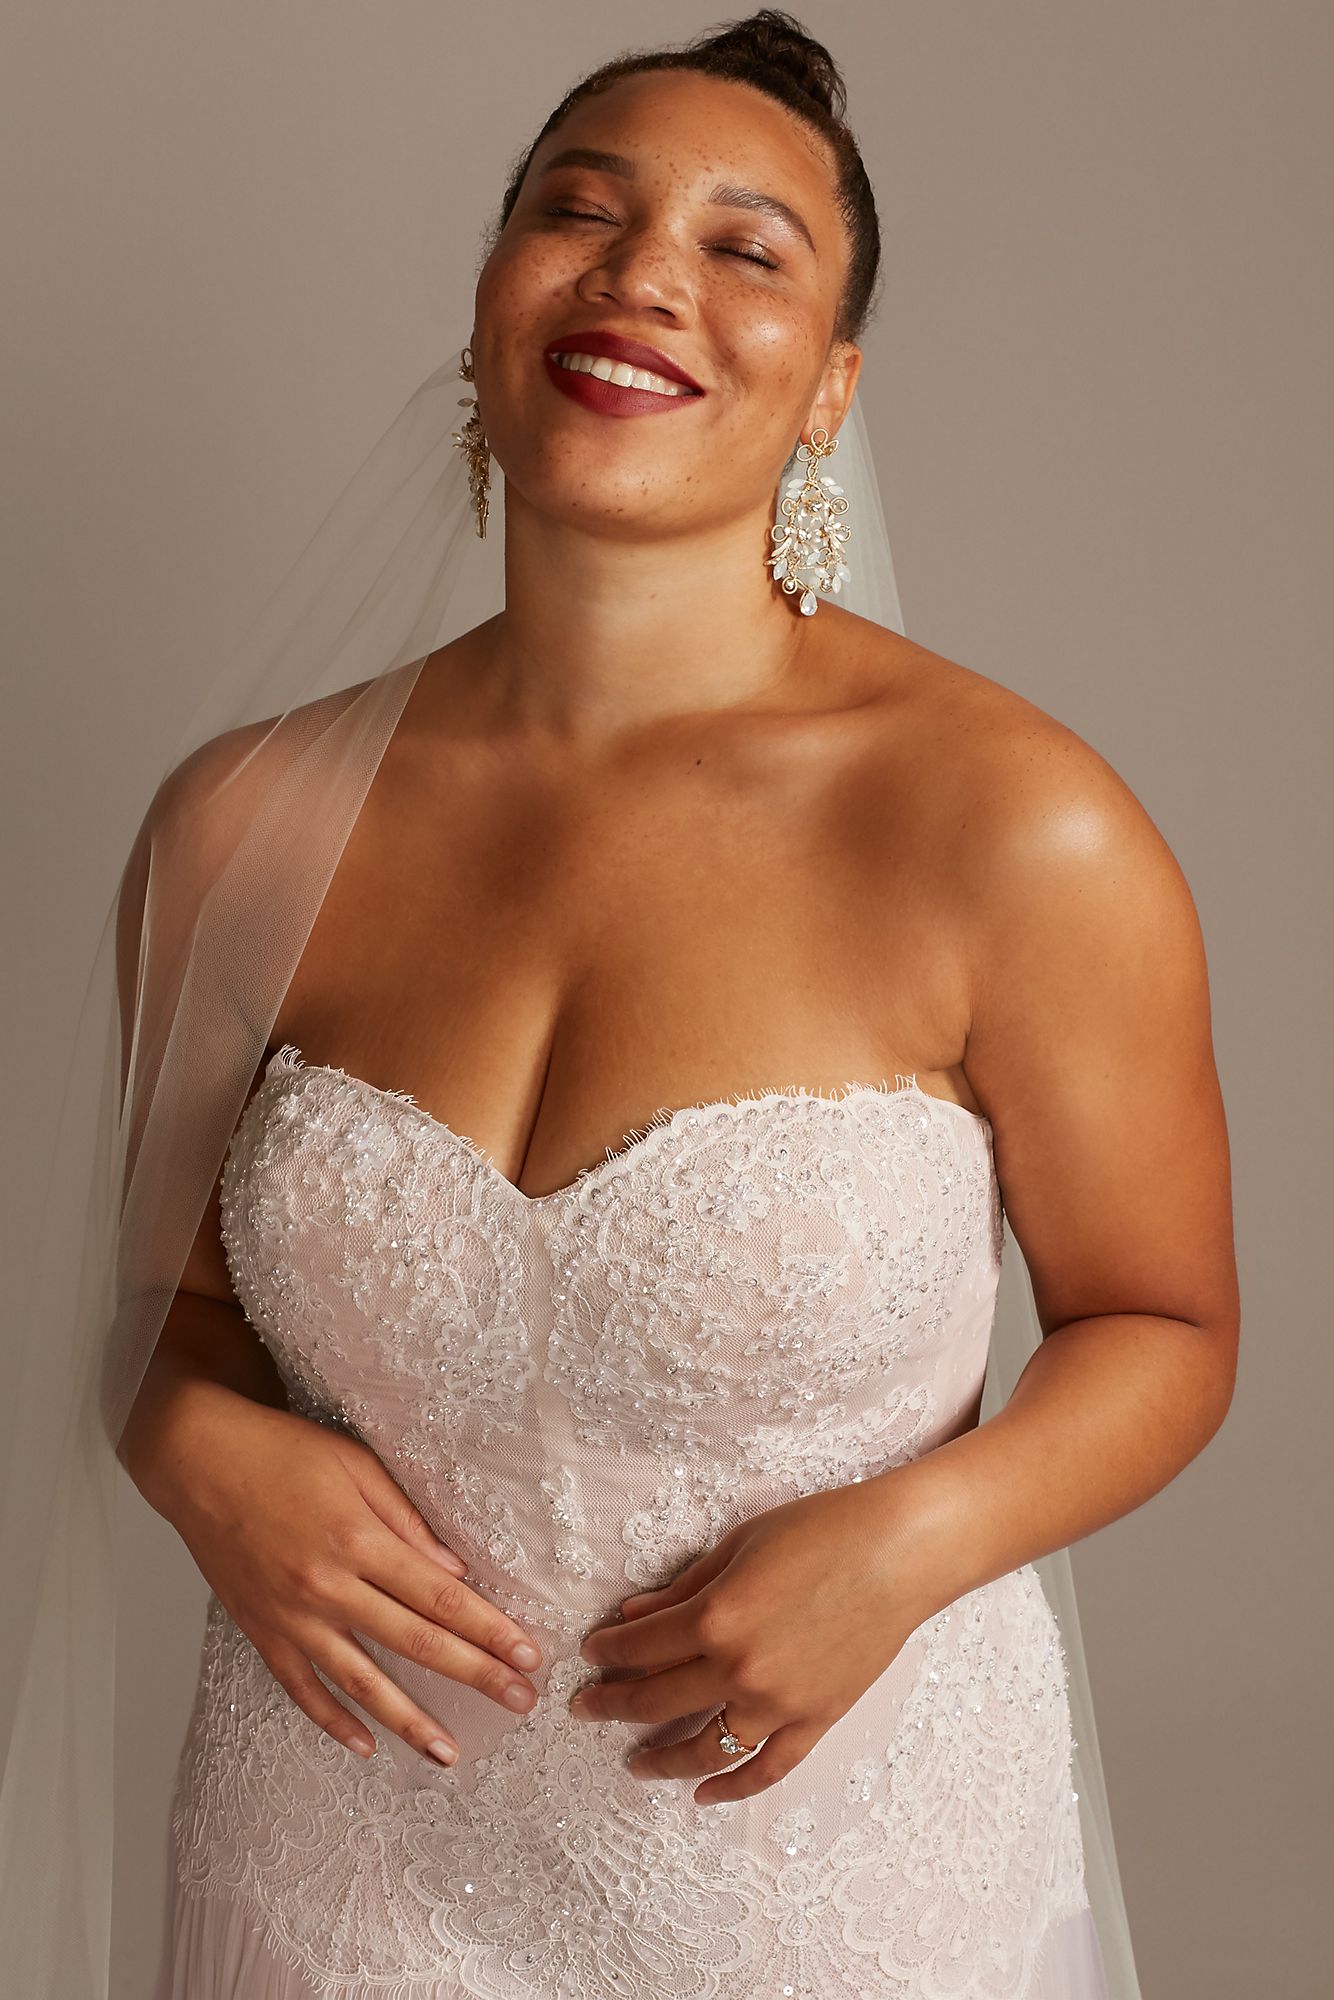 Plus Size Strapless Sweetheart Neckline 8MS251204 Style Banded Lace Bridal Dress